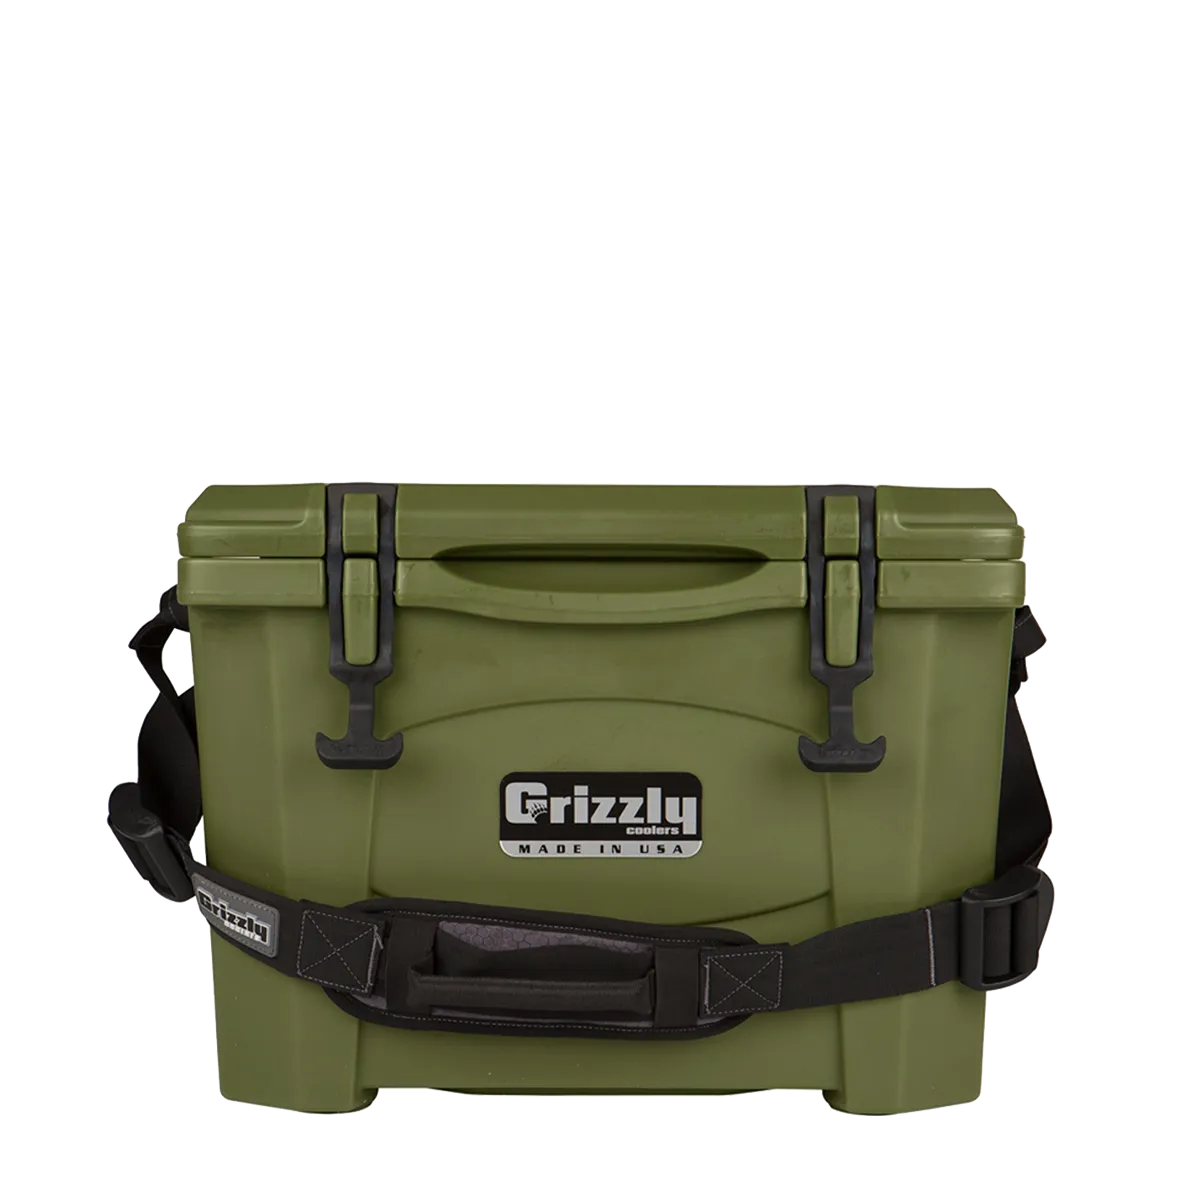 Customized Grizzly Cooler | 15 qt Coolers from Grizzly 